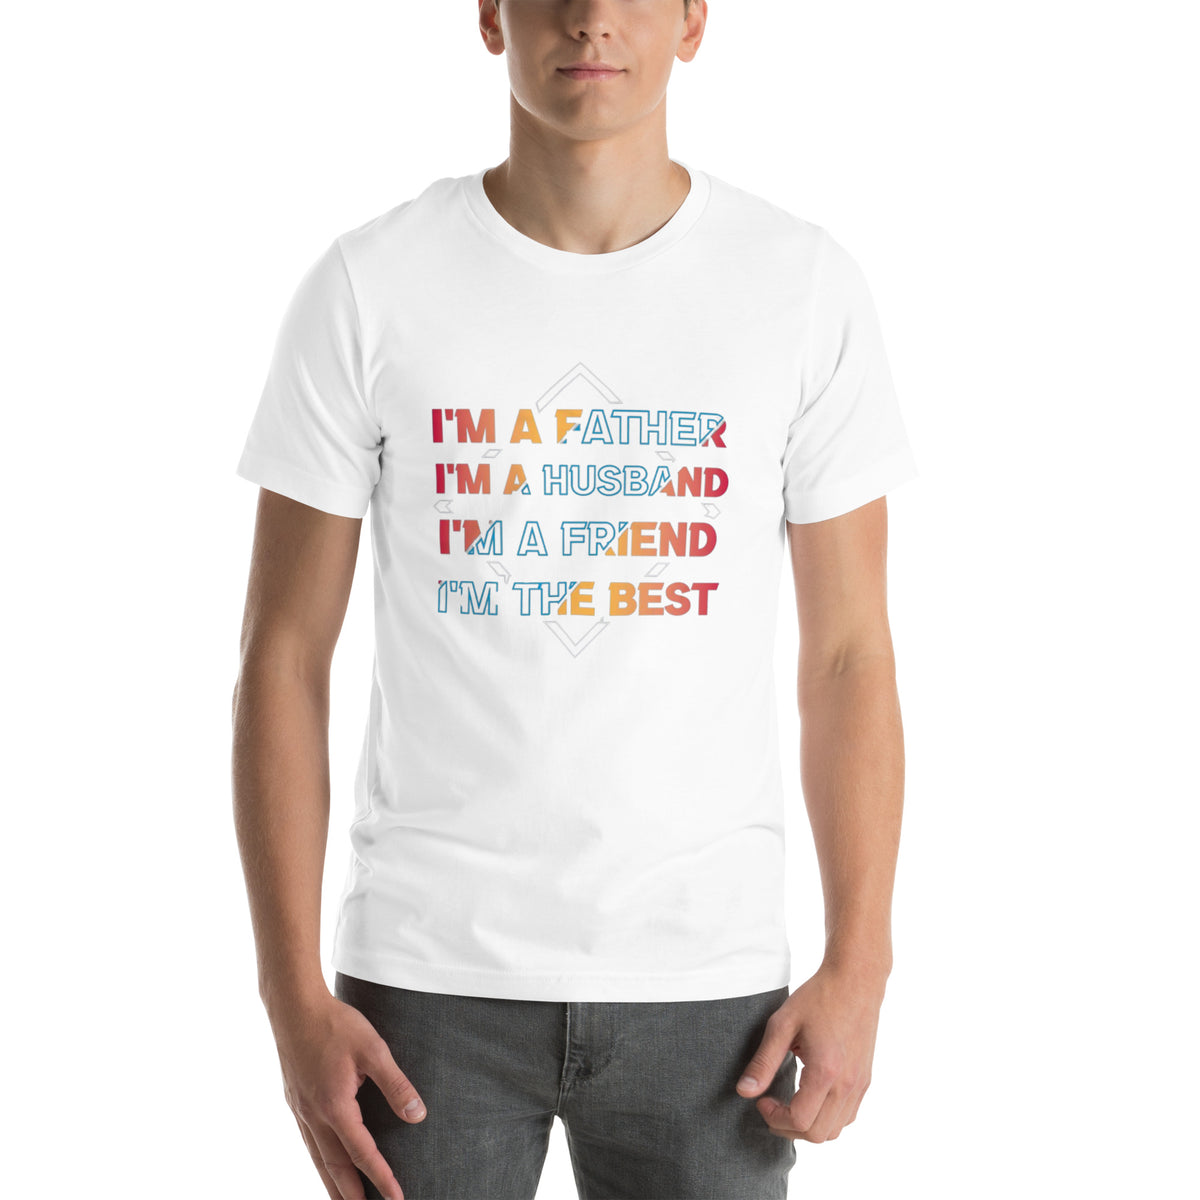 T-SHIRT - I'M A FATHER, I'M A HUSBAND, I'M A FRIEND, I'M THE BEST